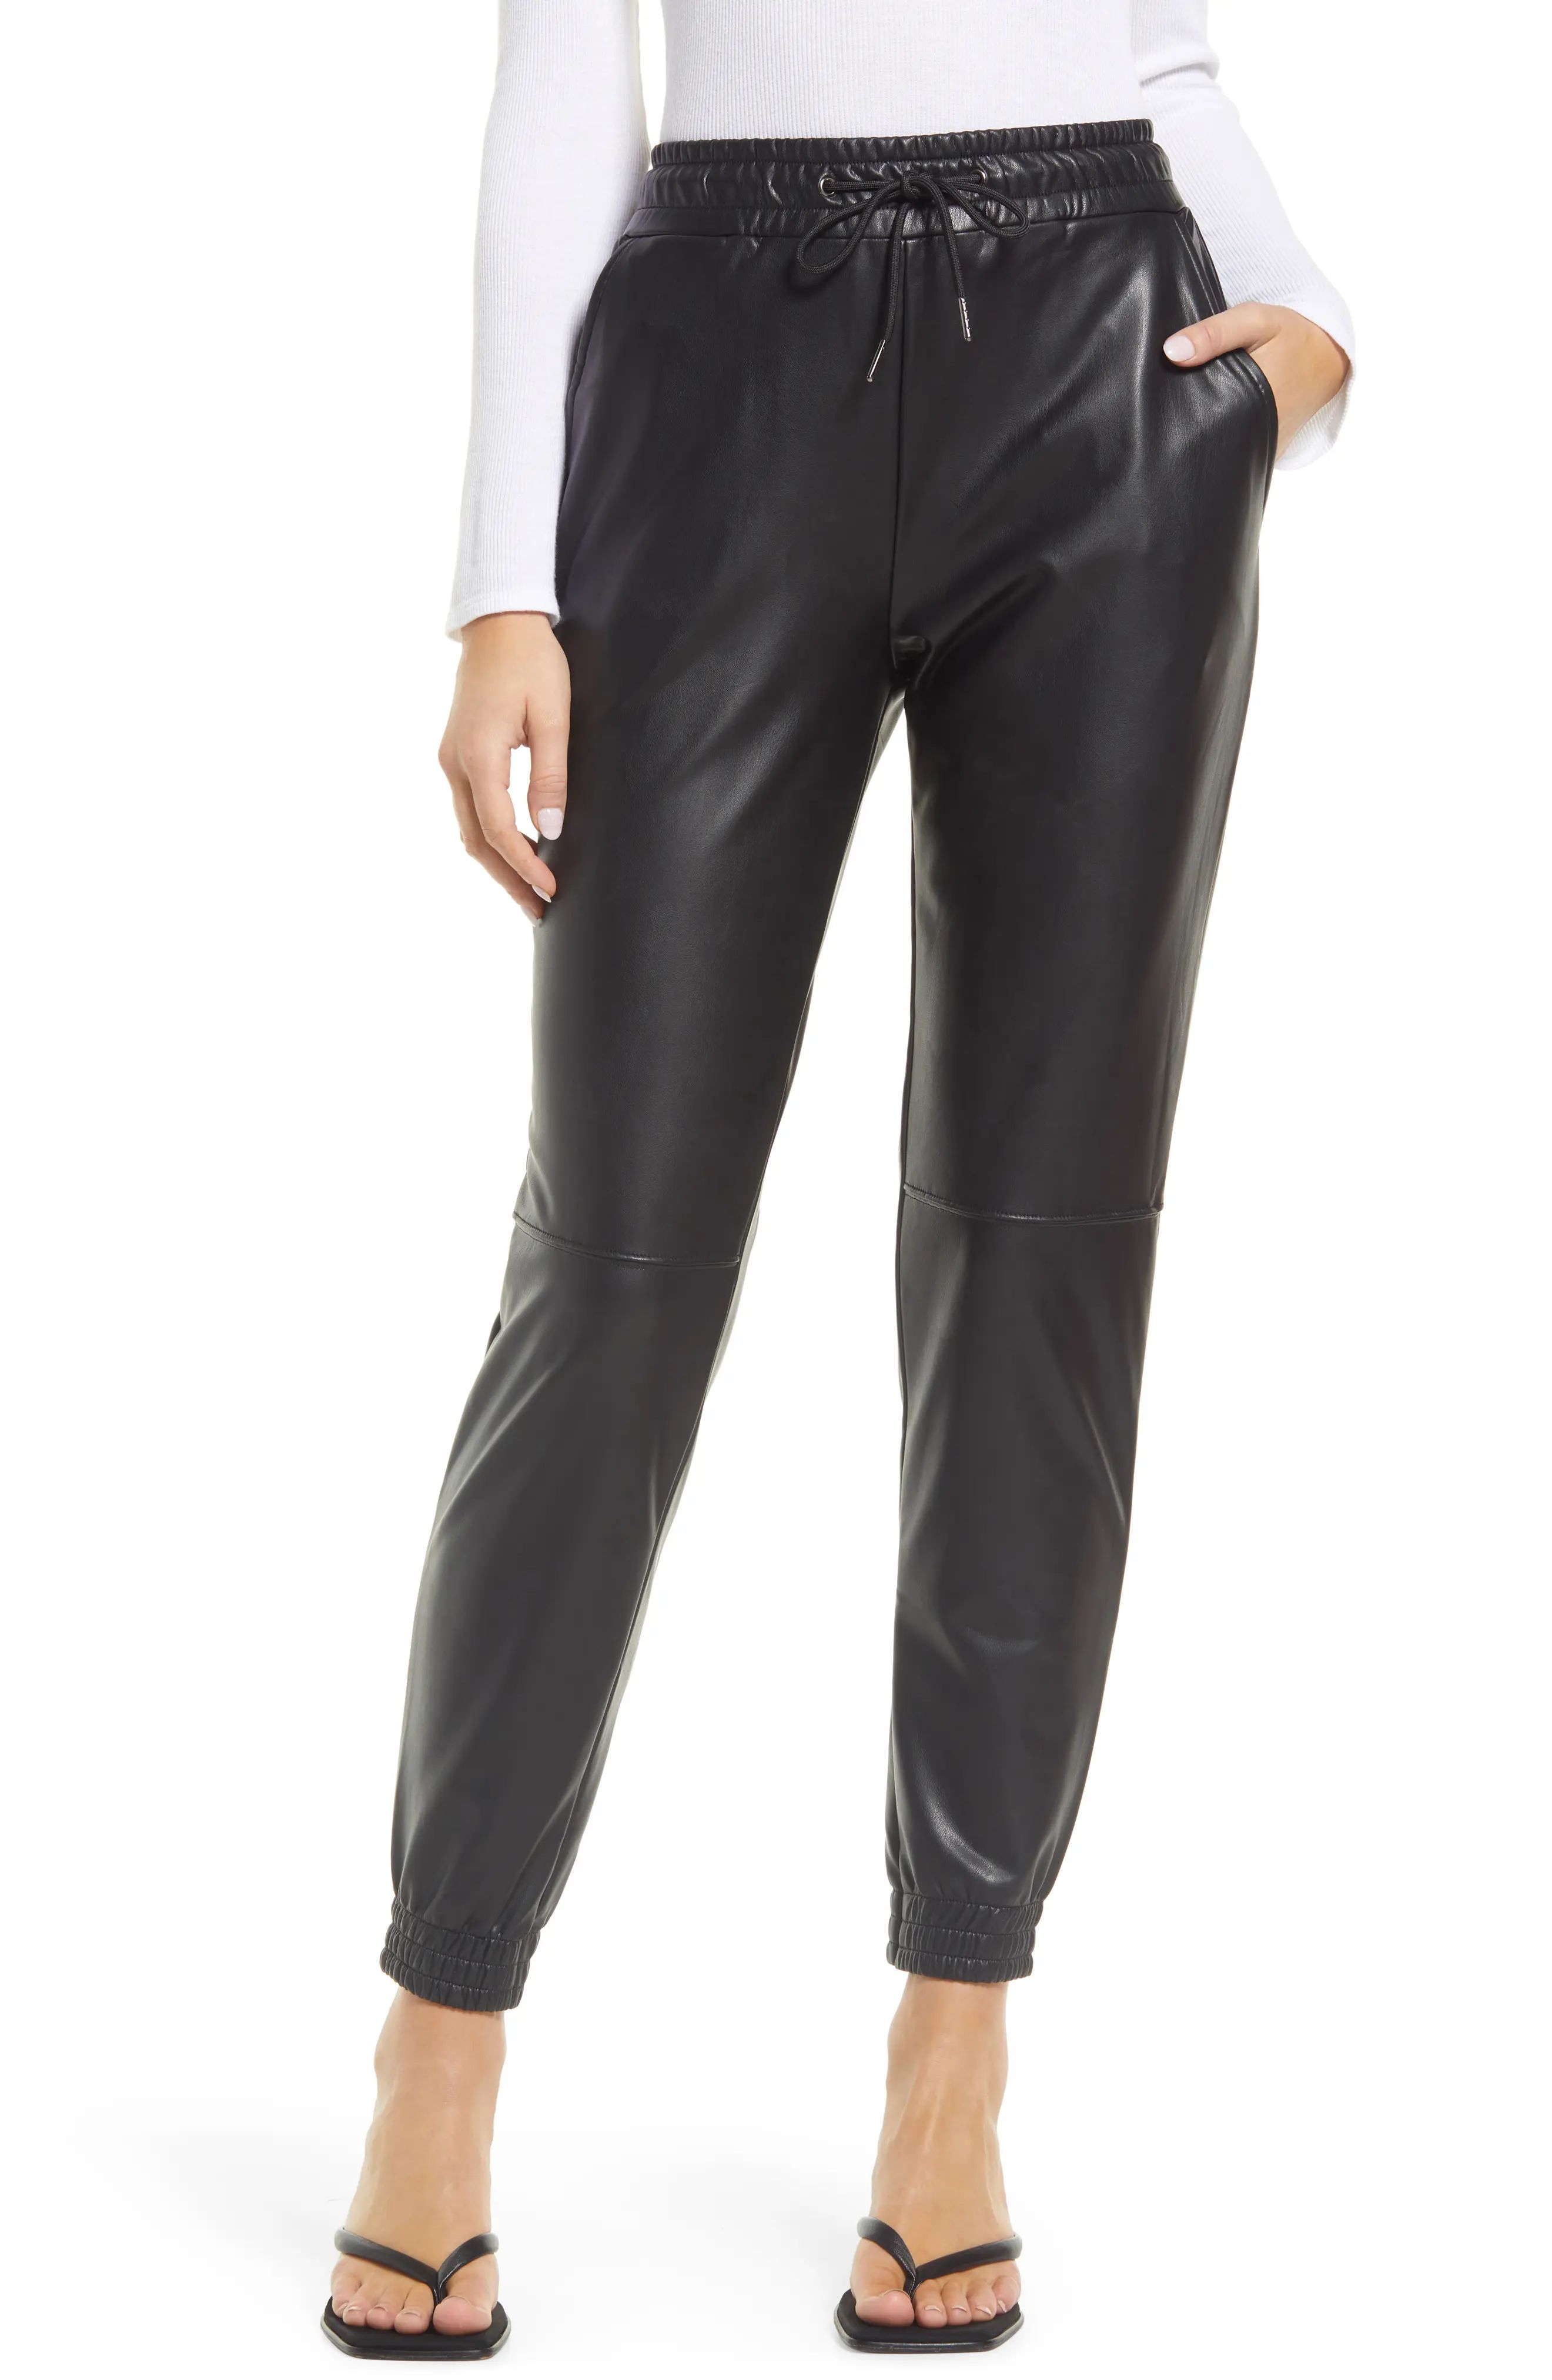 Hue High Waist Faux Leather Joggers, Size Medium in Black at Nordstrom | Nordstrom